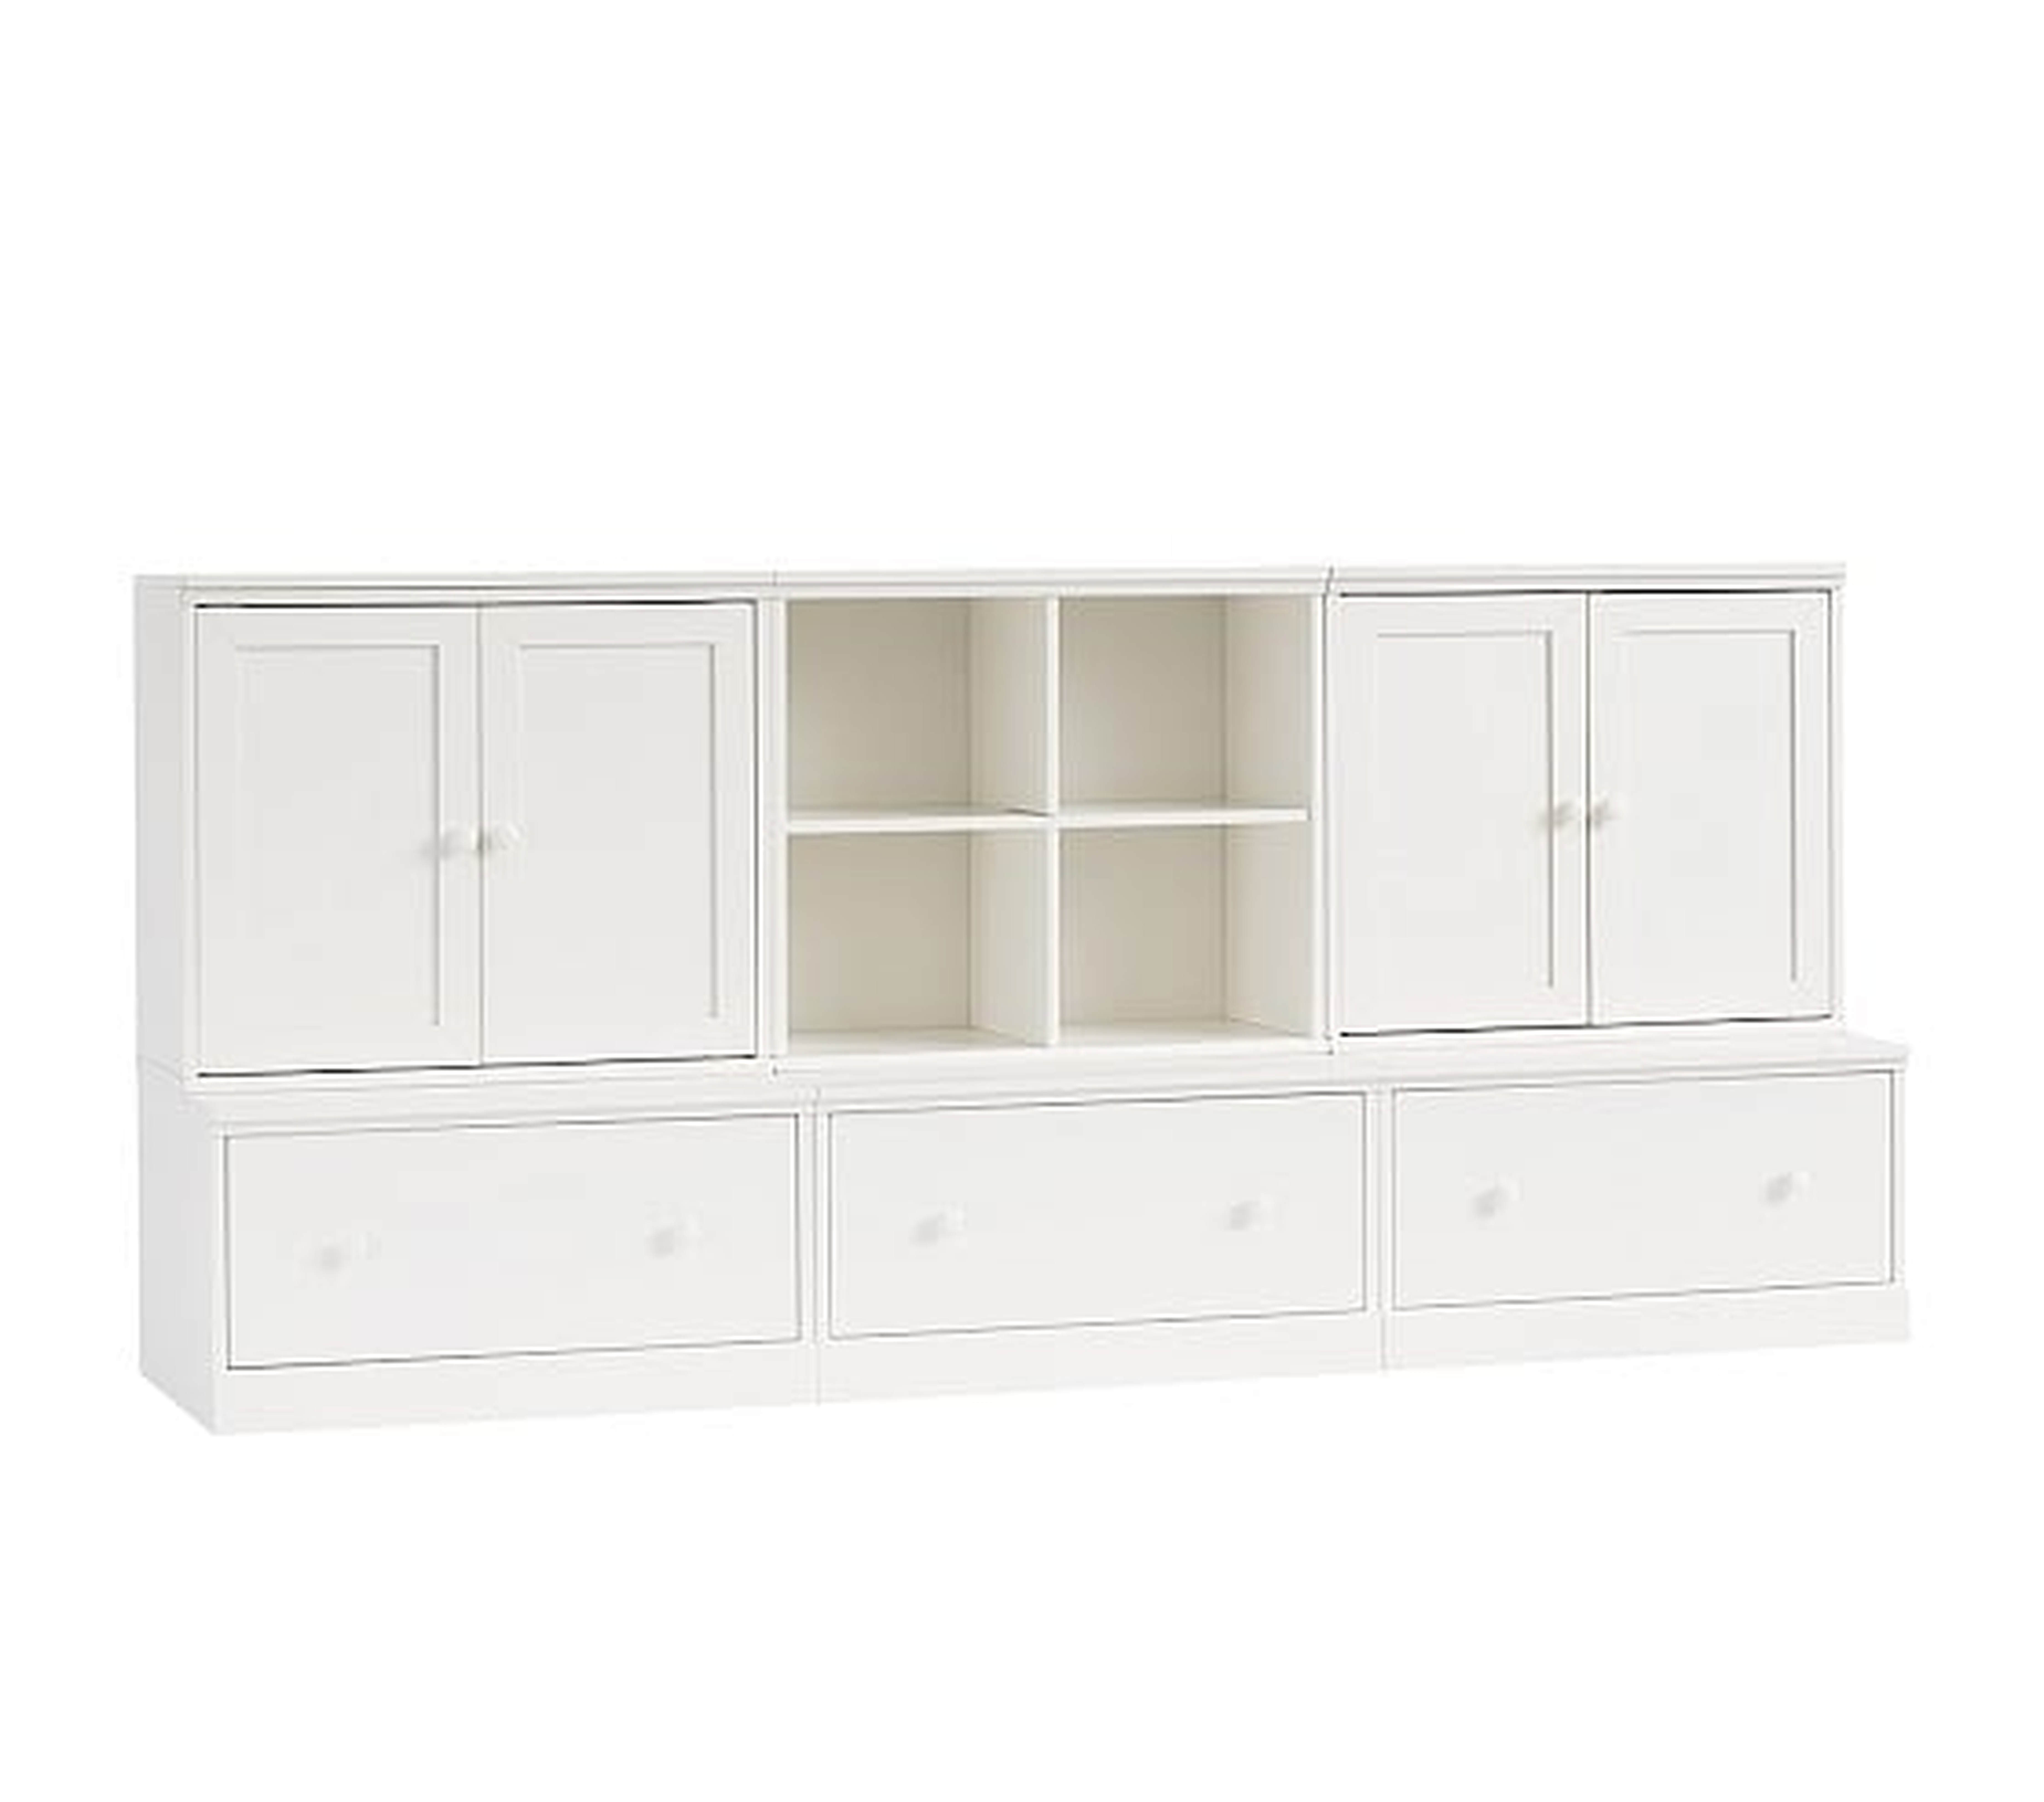 Cameron 1 Cubby, 2 Cabinets, &amp; 3 Drawer Bases, Simply White, UPS - Pottery Barn Kids